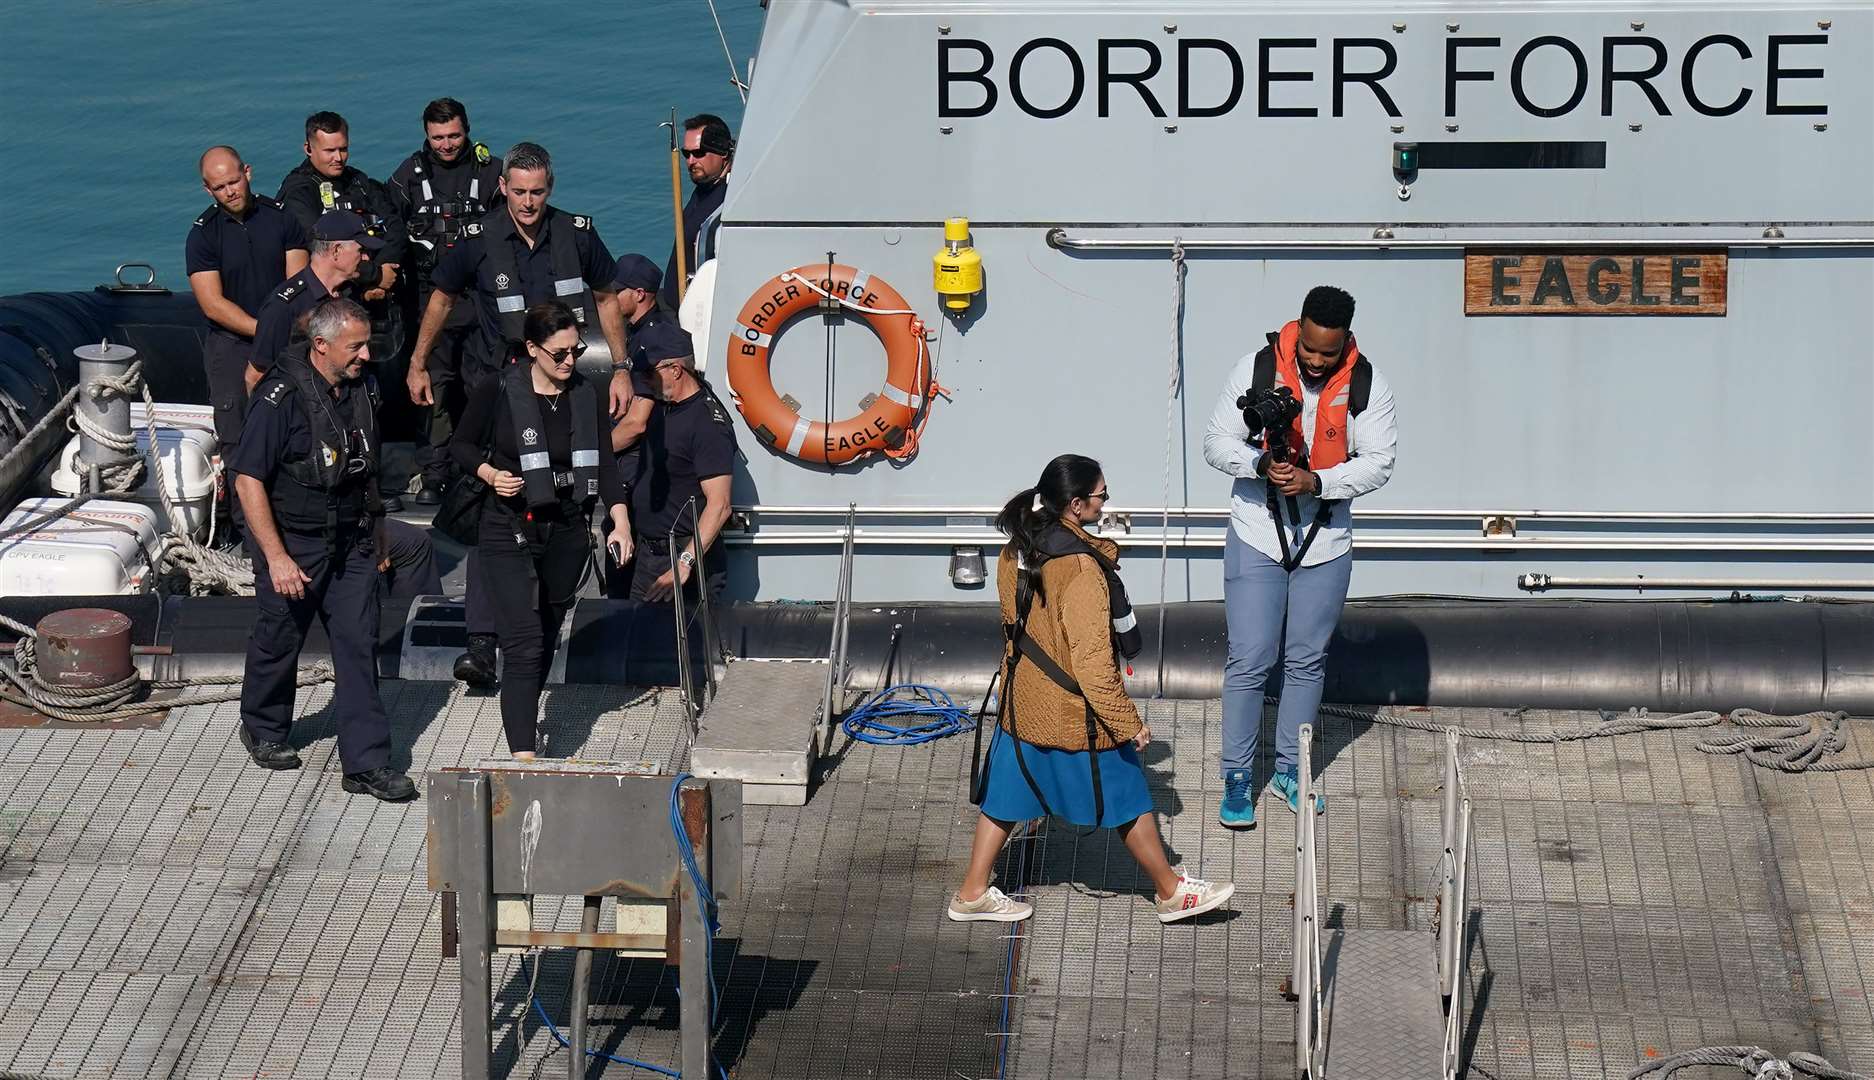 Home Secretary Priti Patel during a visit to the Border Force facility in Dover, Kent (Gareth Fuller/PA)